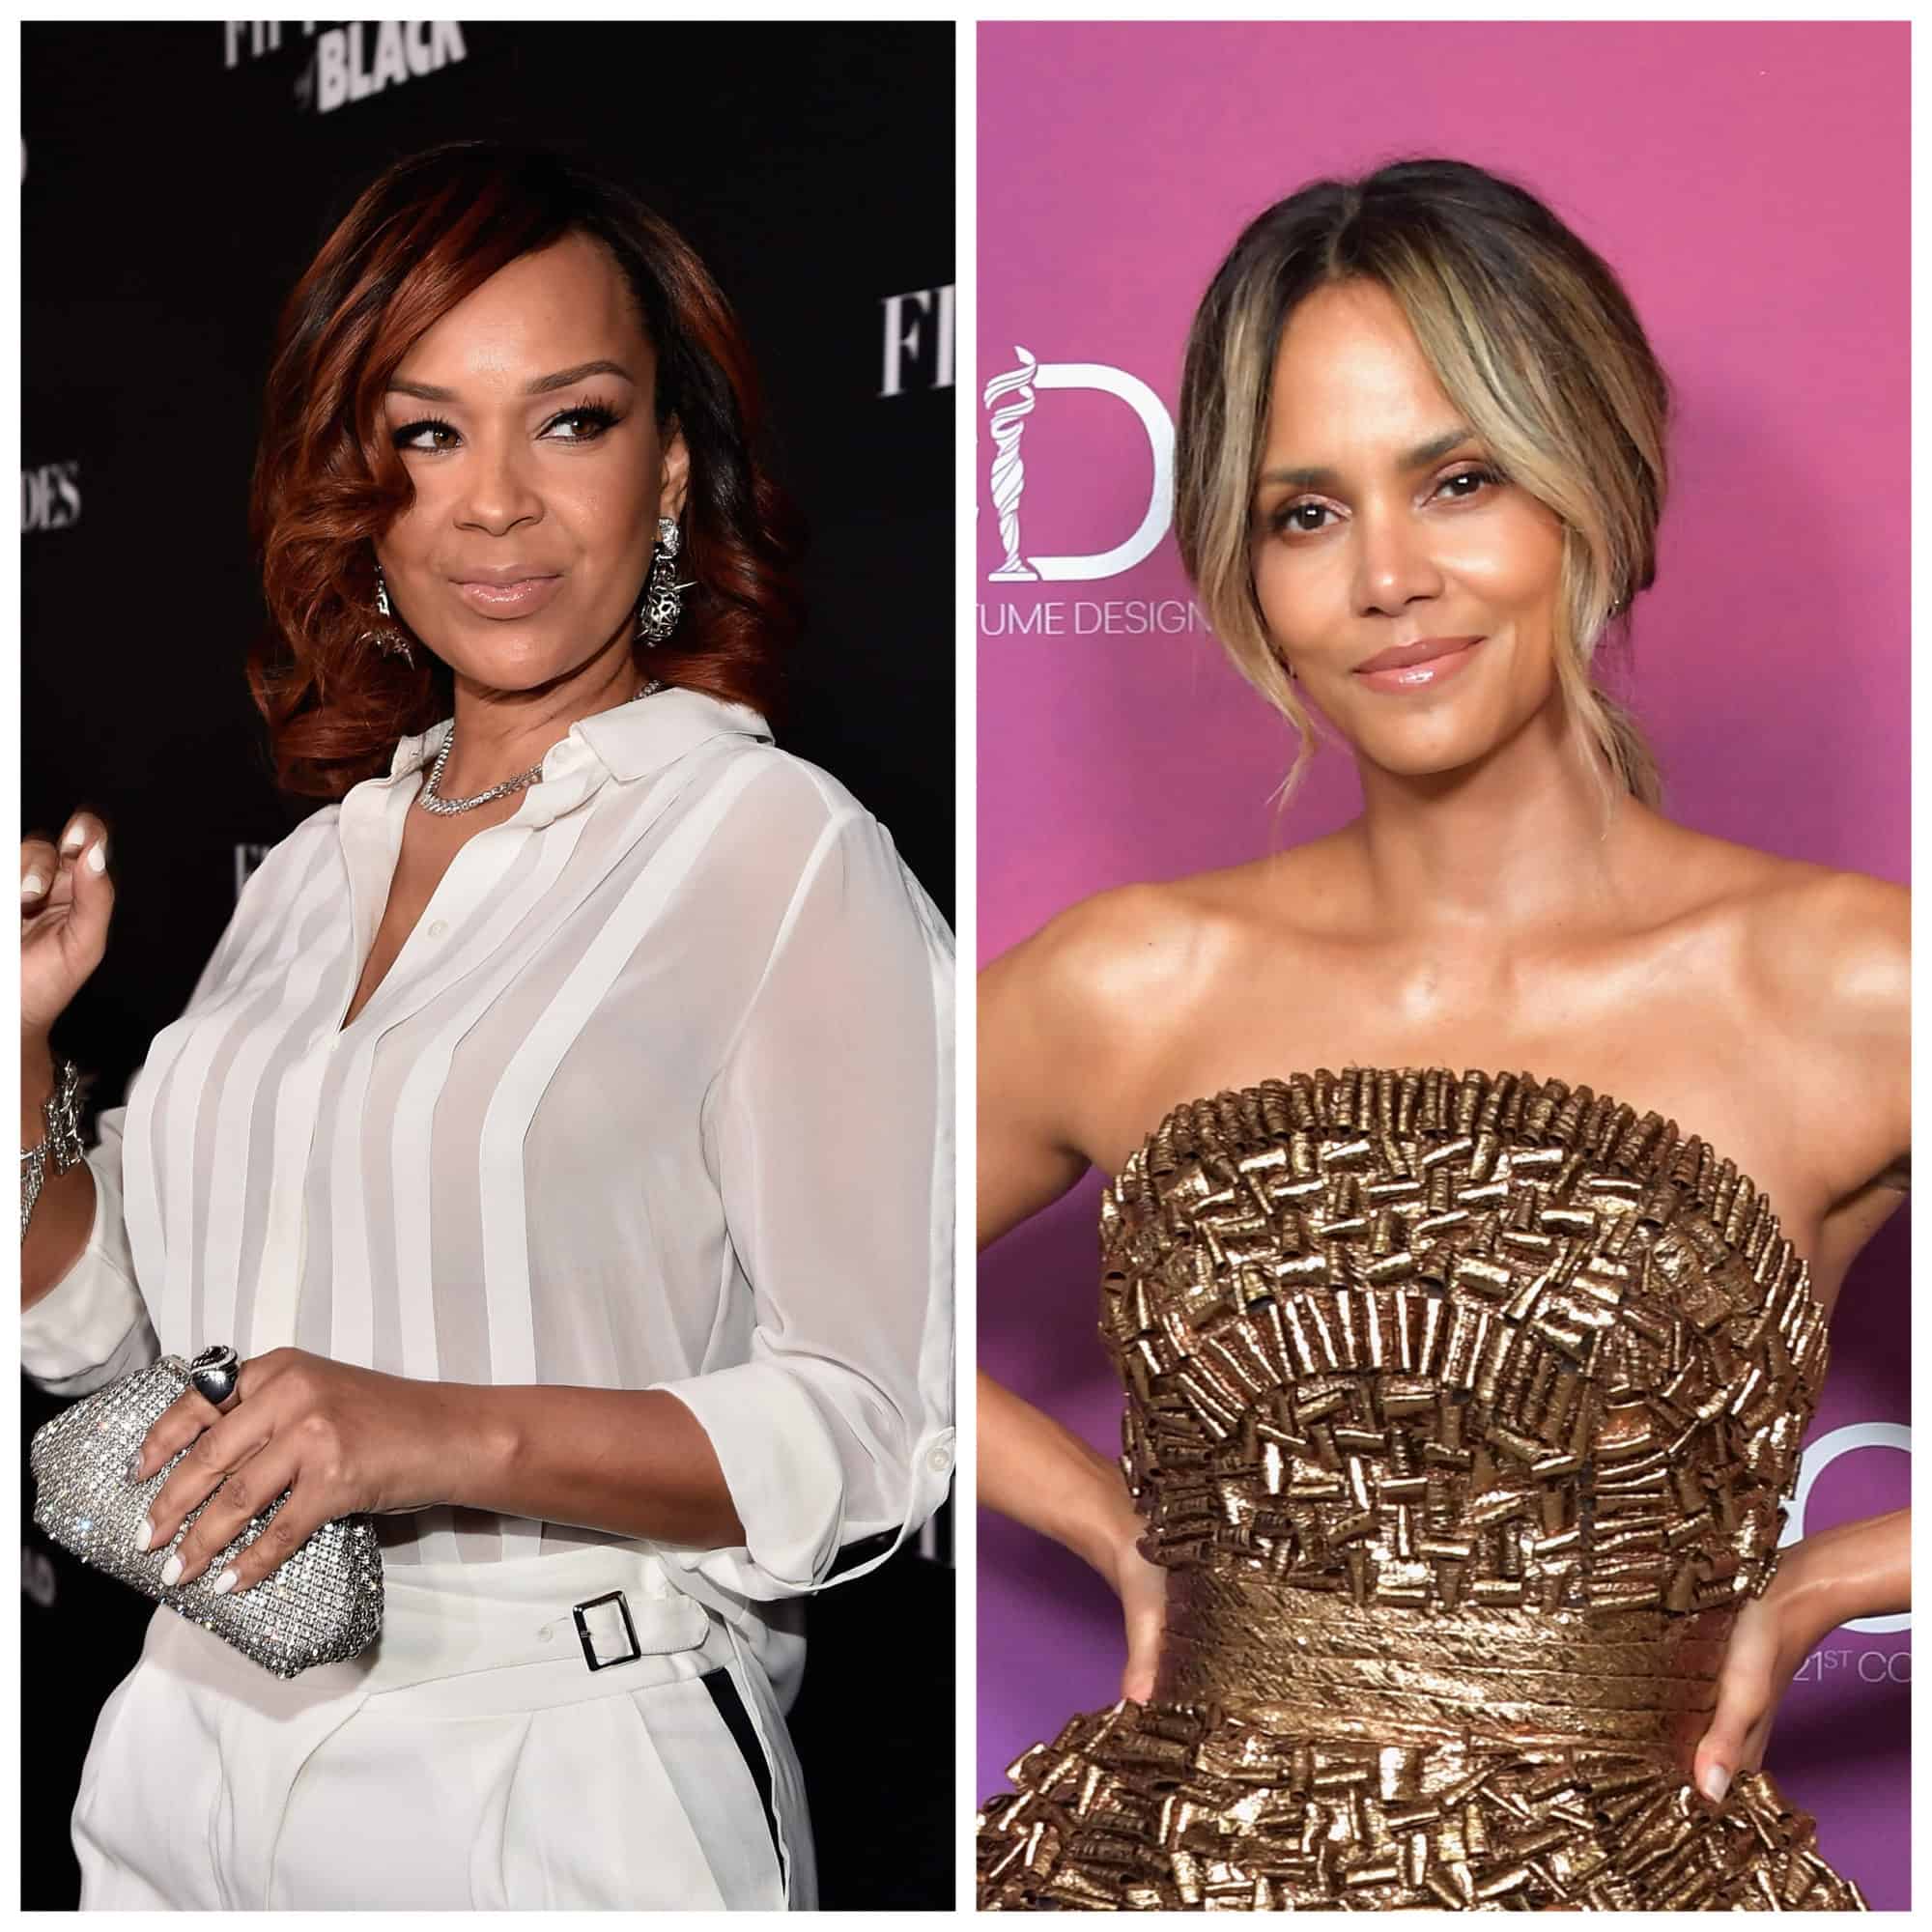 Halle Berry Claps Back About The Bedroom Rumors, Tells LisaRaye To Ask Her Man Van Hunt About Her 